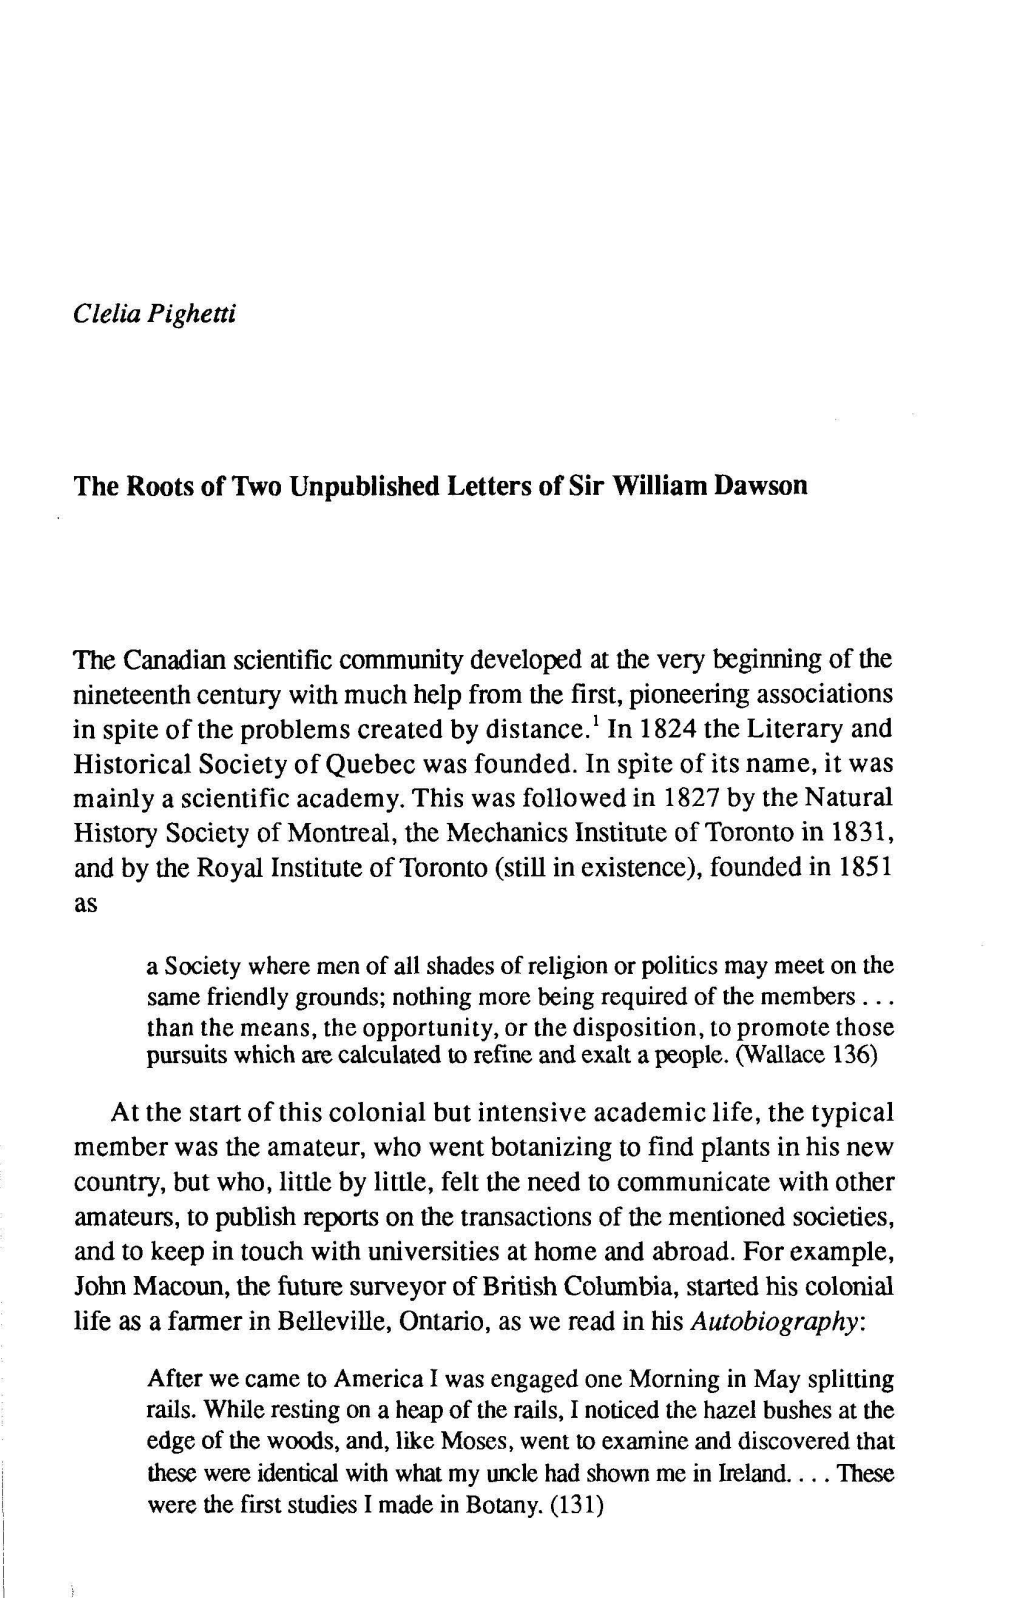 The Roots of Two Unpublished Letters of Sir William Dawson